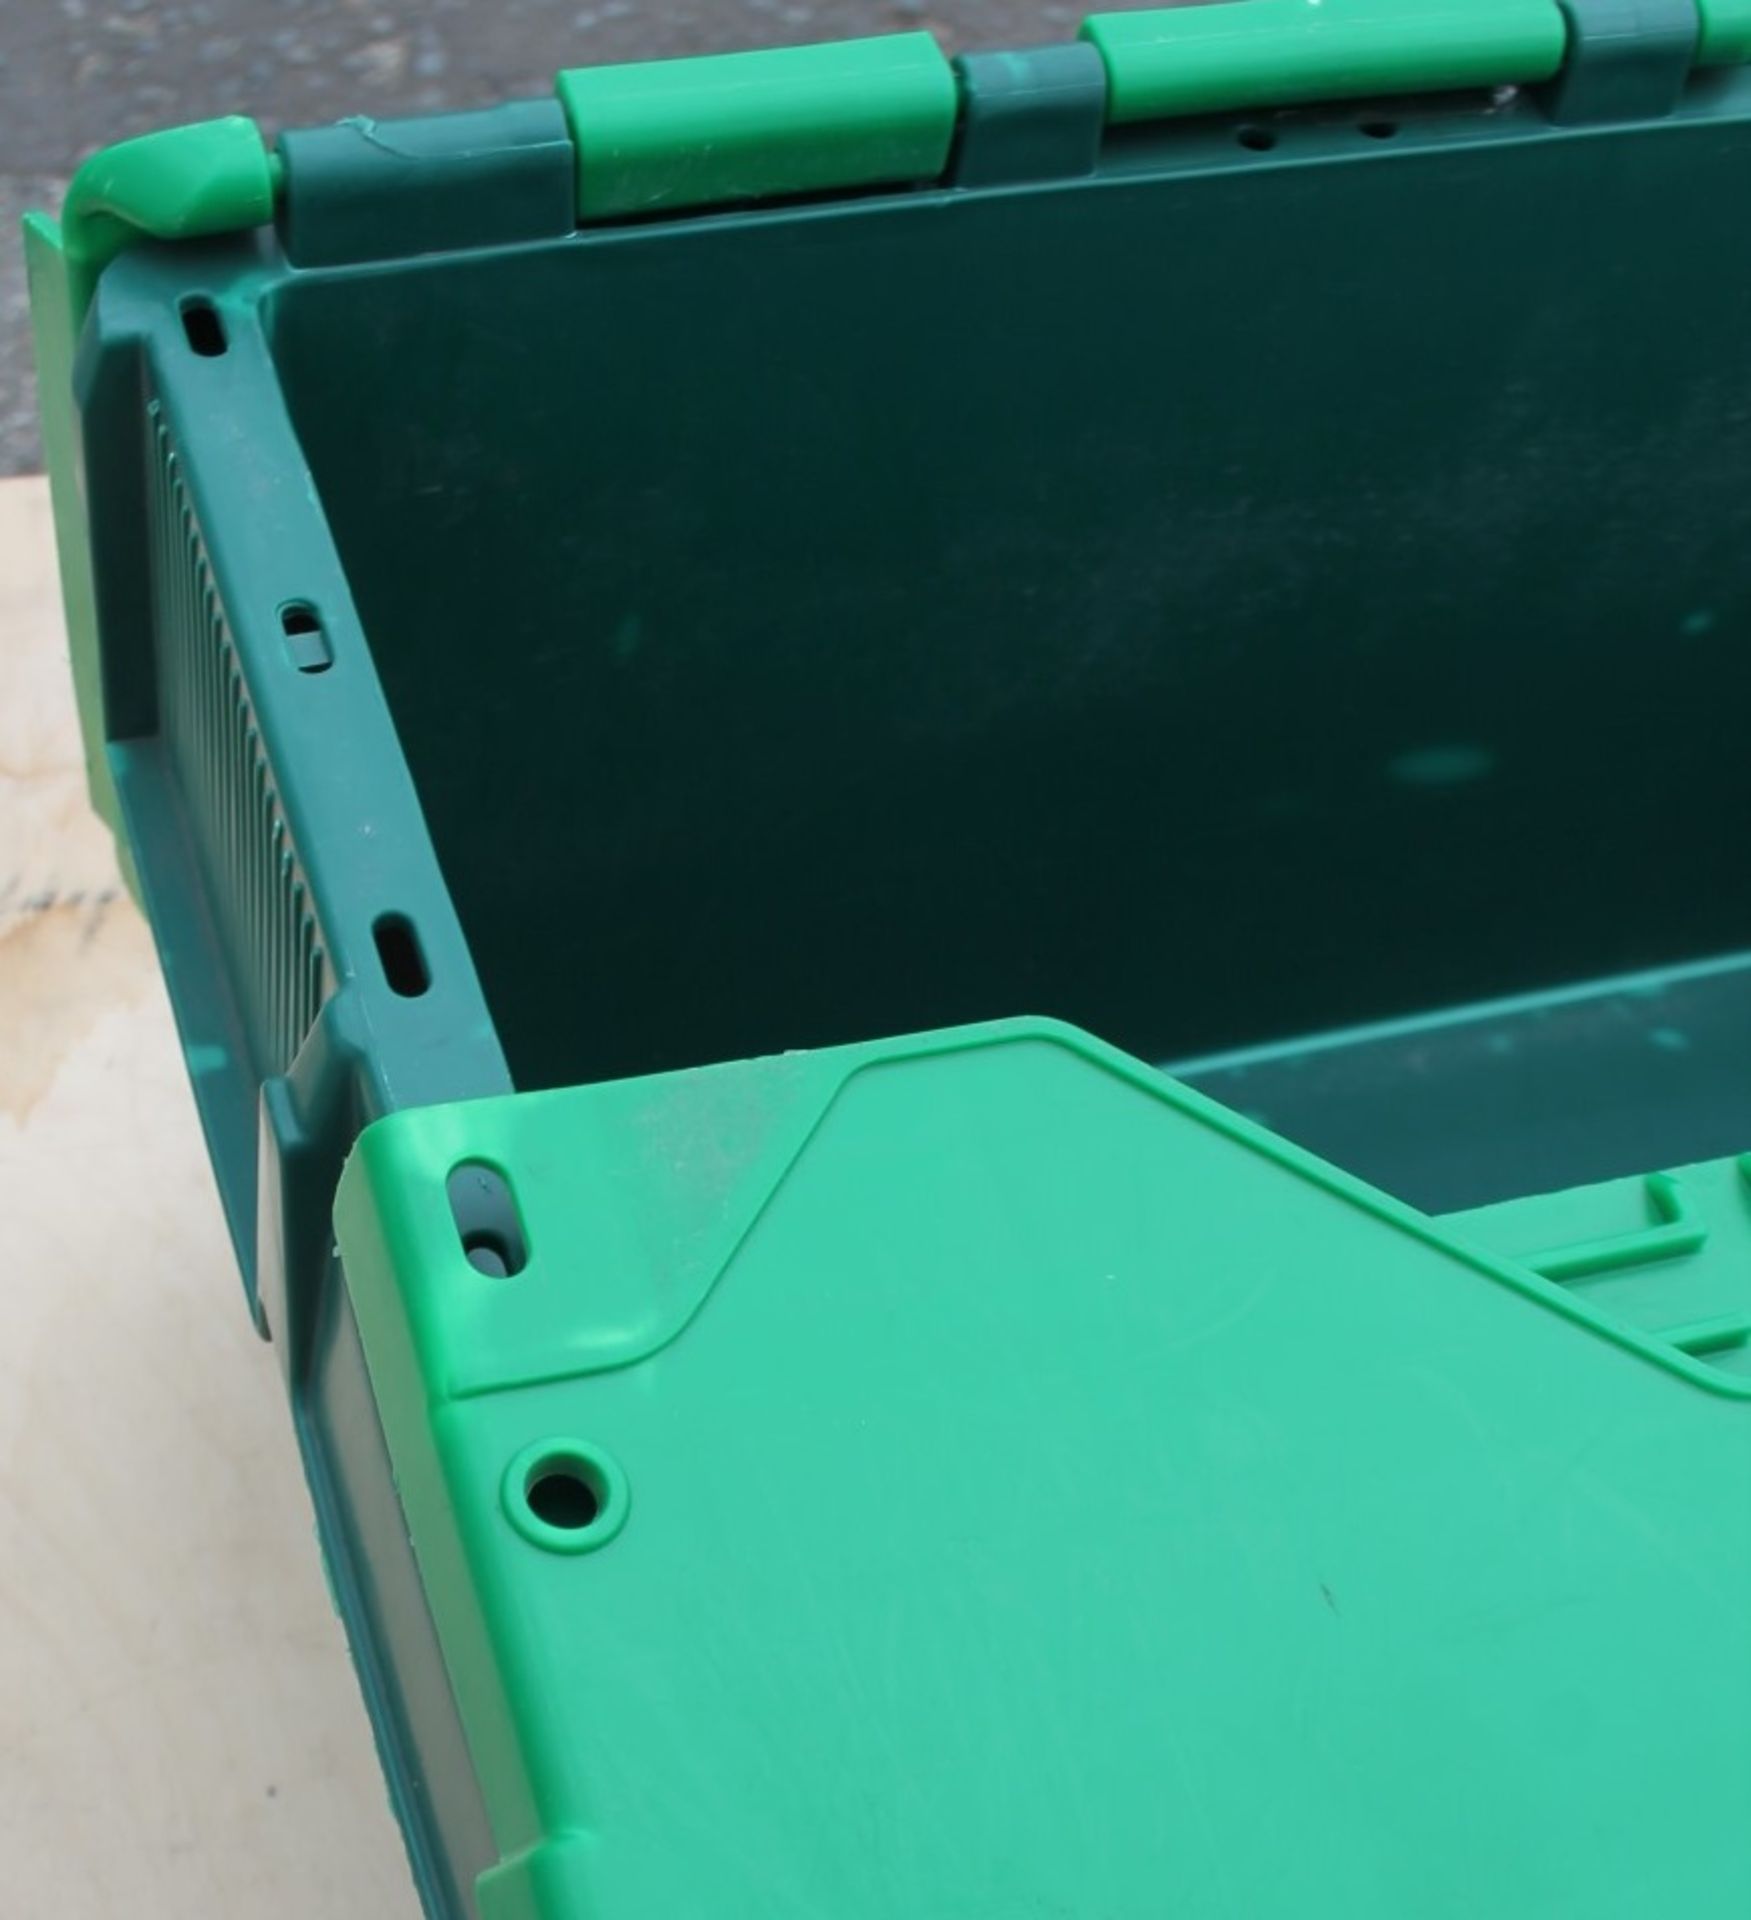 20 x Robust Low Profile Green Plastic Secure Storage Boxes With Attached Hinged Lids - Dimensions: - Image 5 of 6